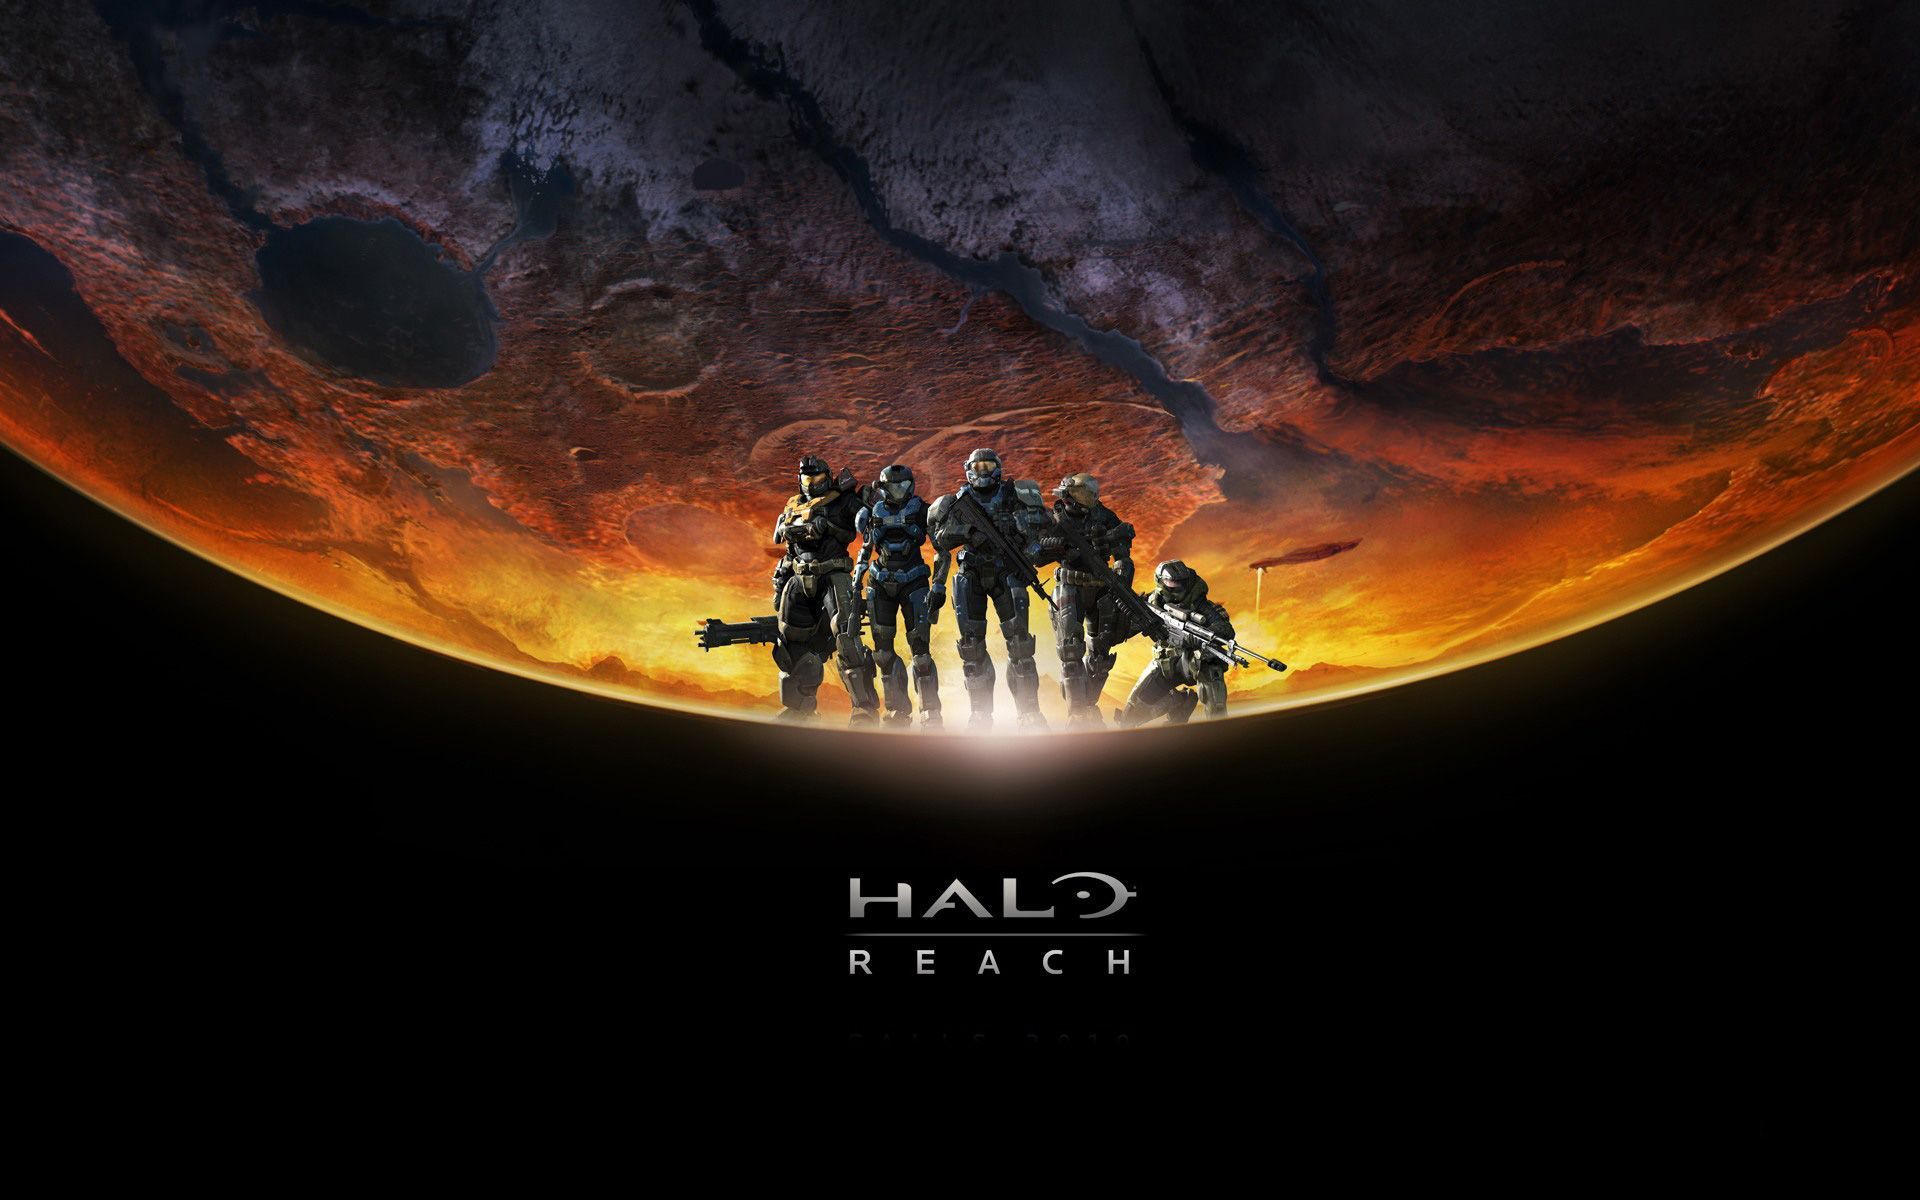 Halo Reach 2010 Wallpapers | HD Wallpapers